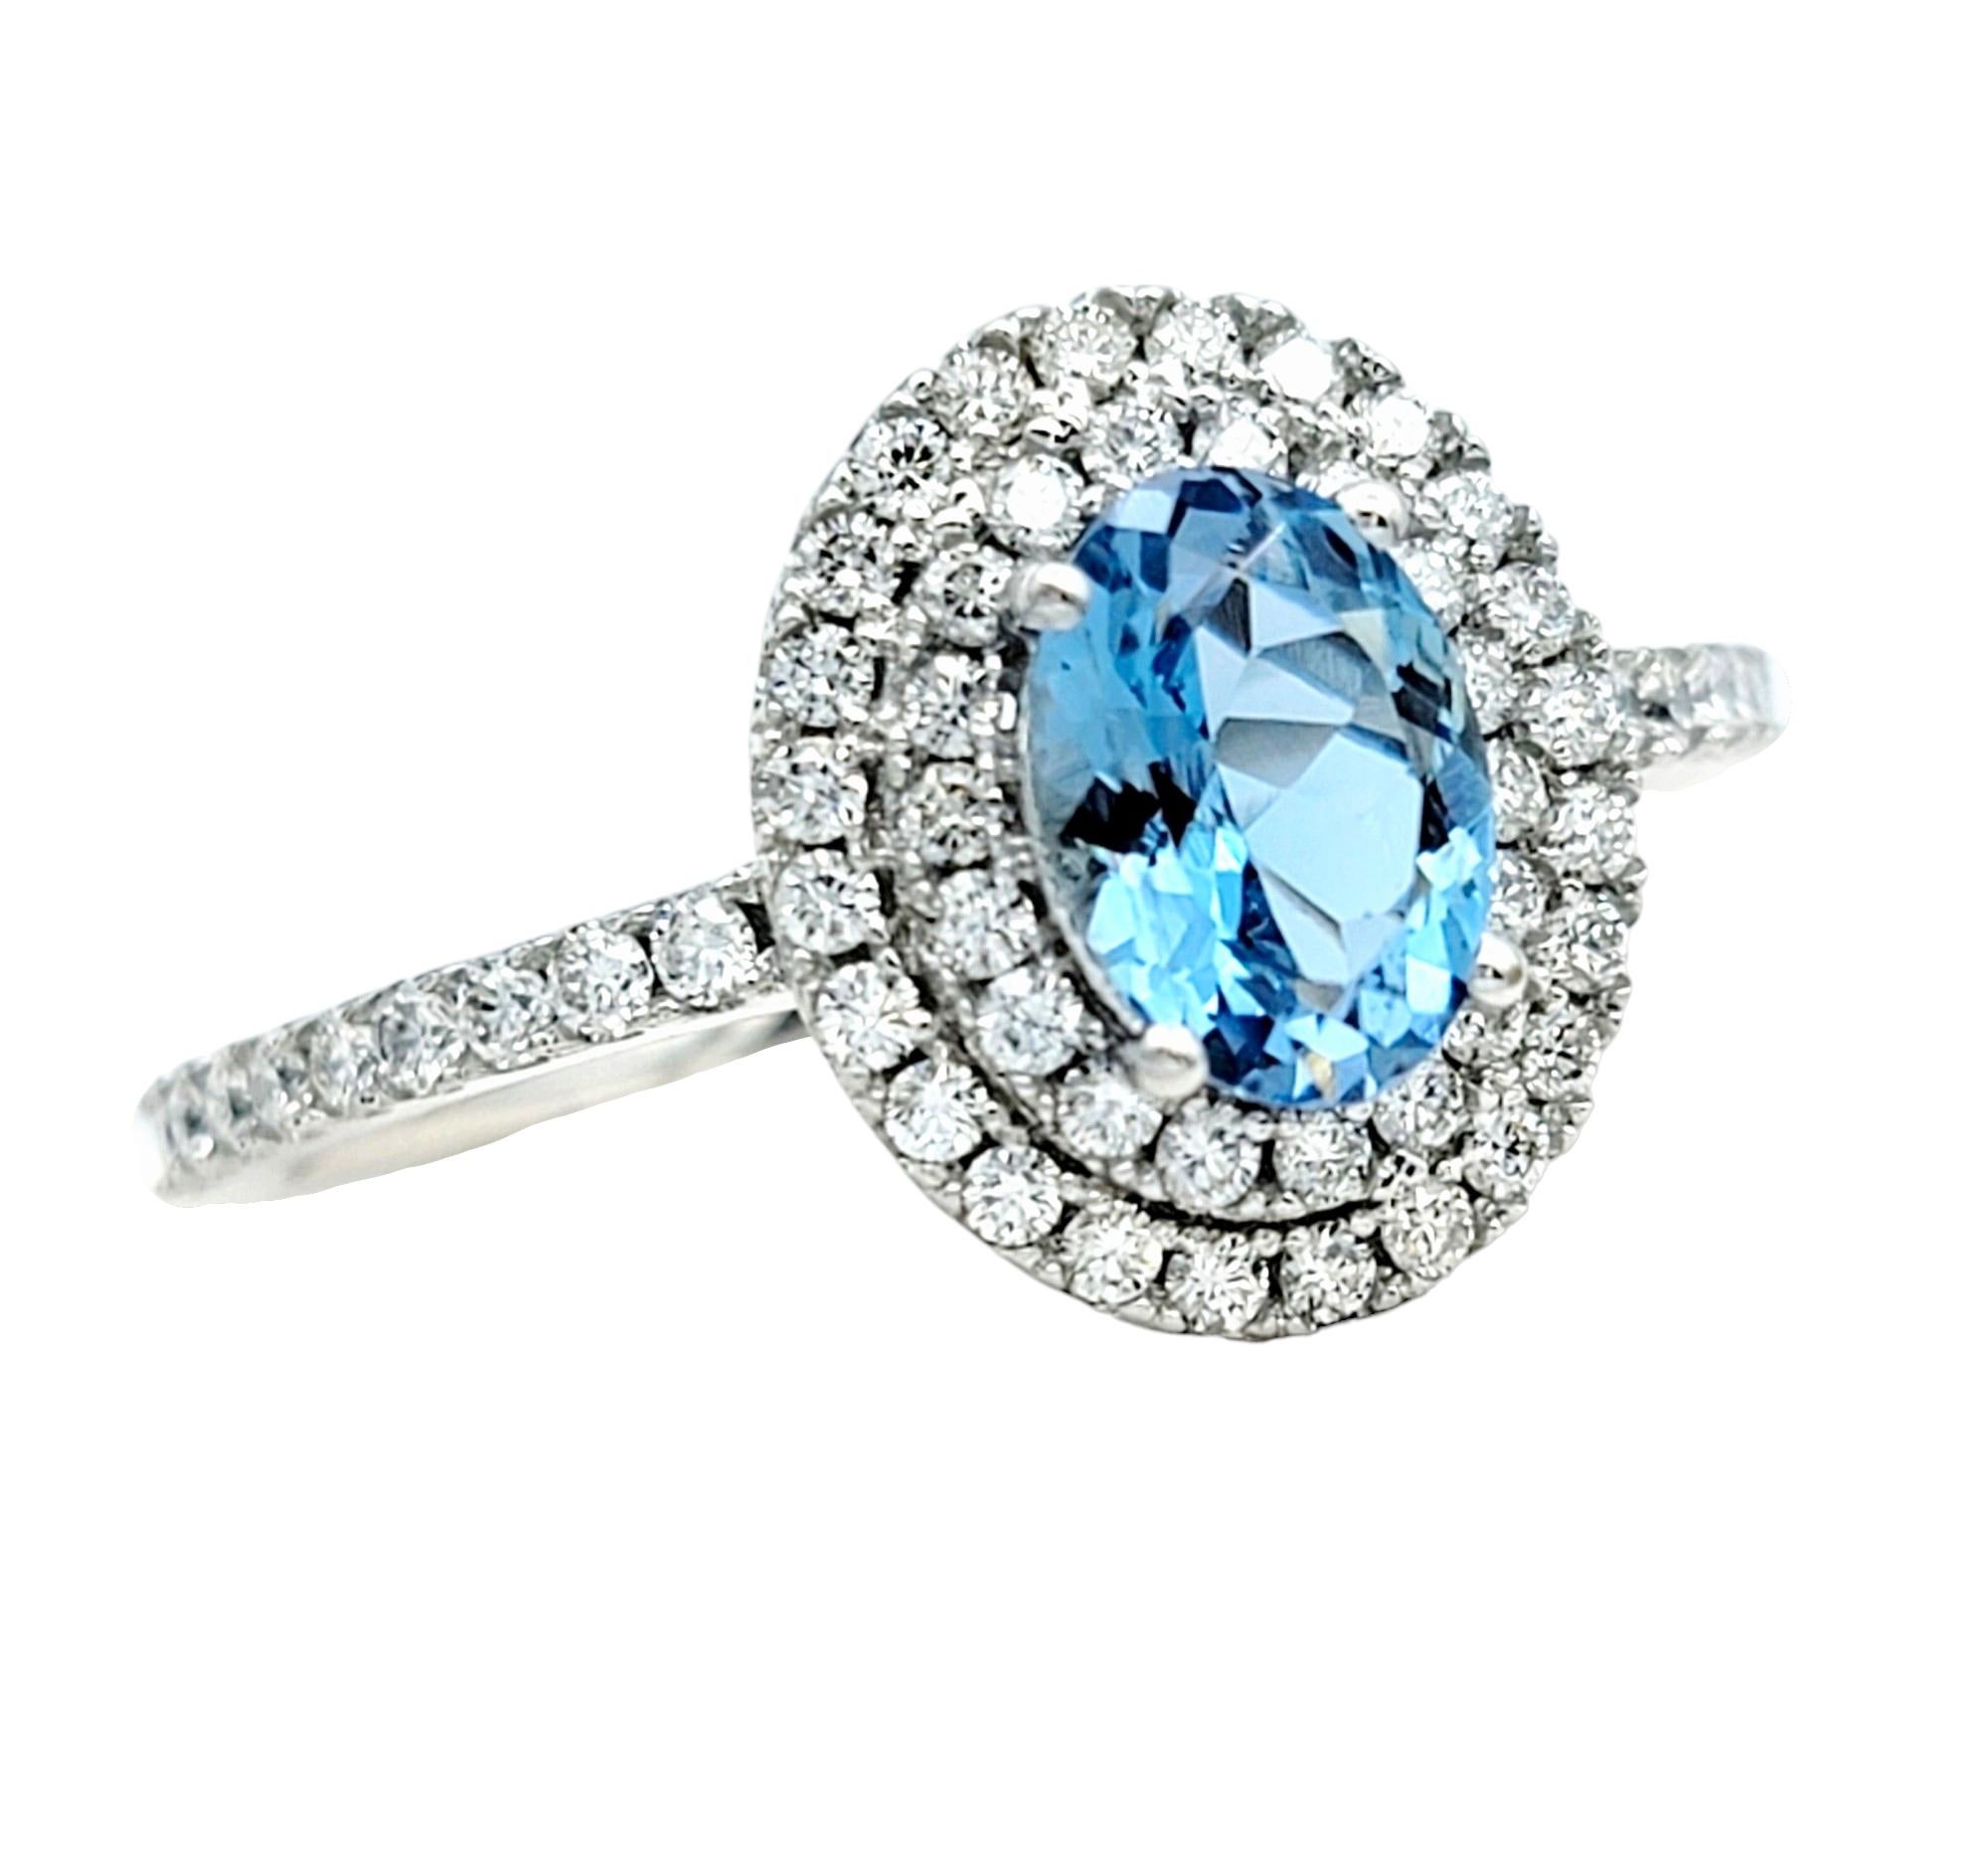 Ring Size: 7

This exquisite ring is a testament to timeless elegance and refined sophistication. Nestled at its heart is a captivating oval aquamarine, its serene blue hue reminiscent of tranquil waters, set meticulously in 18 karat white gold. The